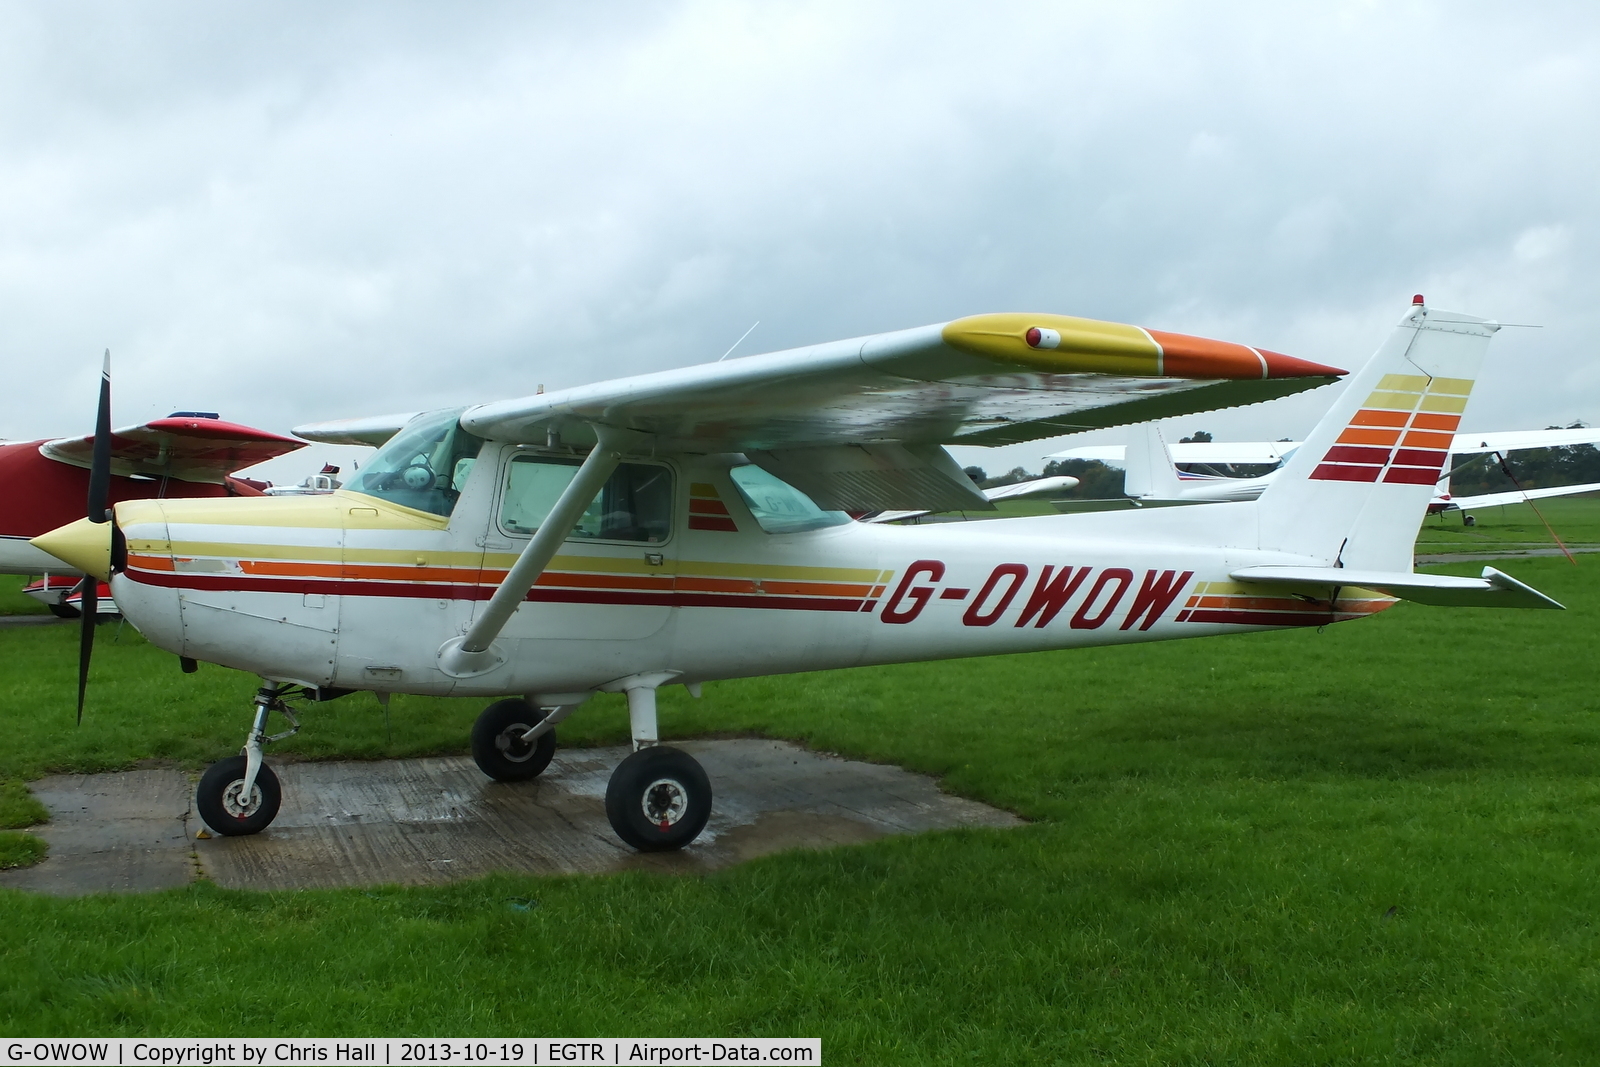 G-OWOW, 1979 Cessna 152 C/N 152-83199, ex Cabair now privately owned